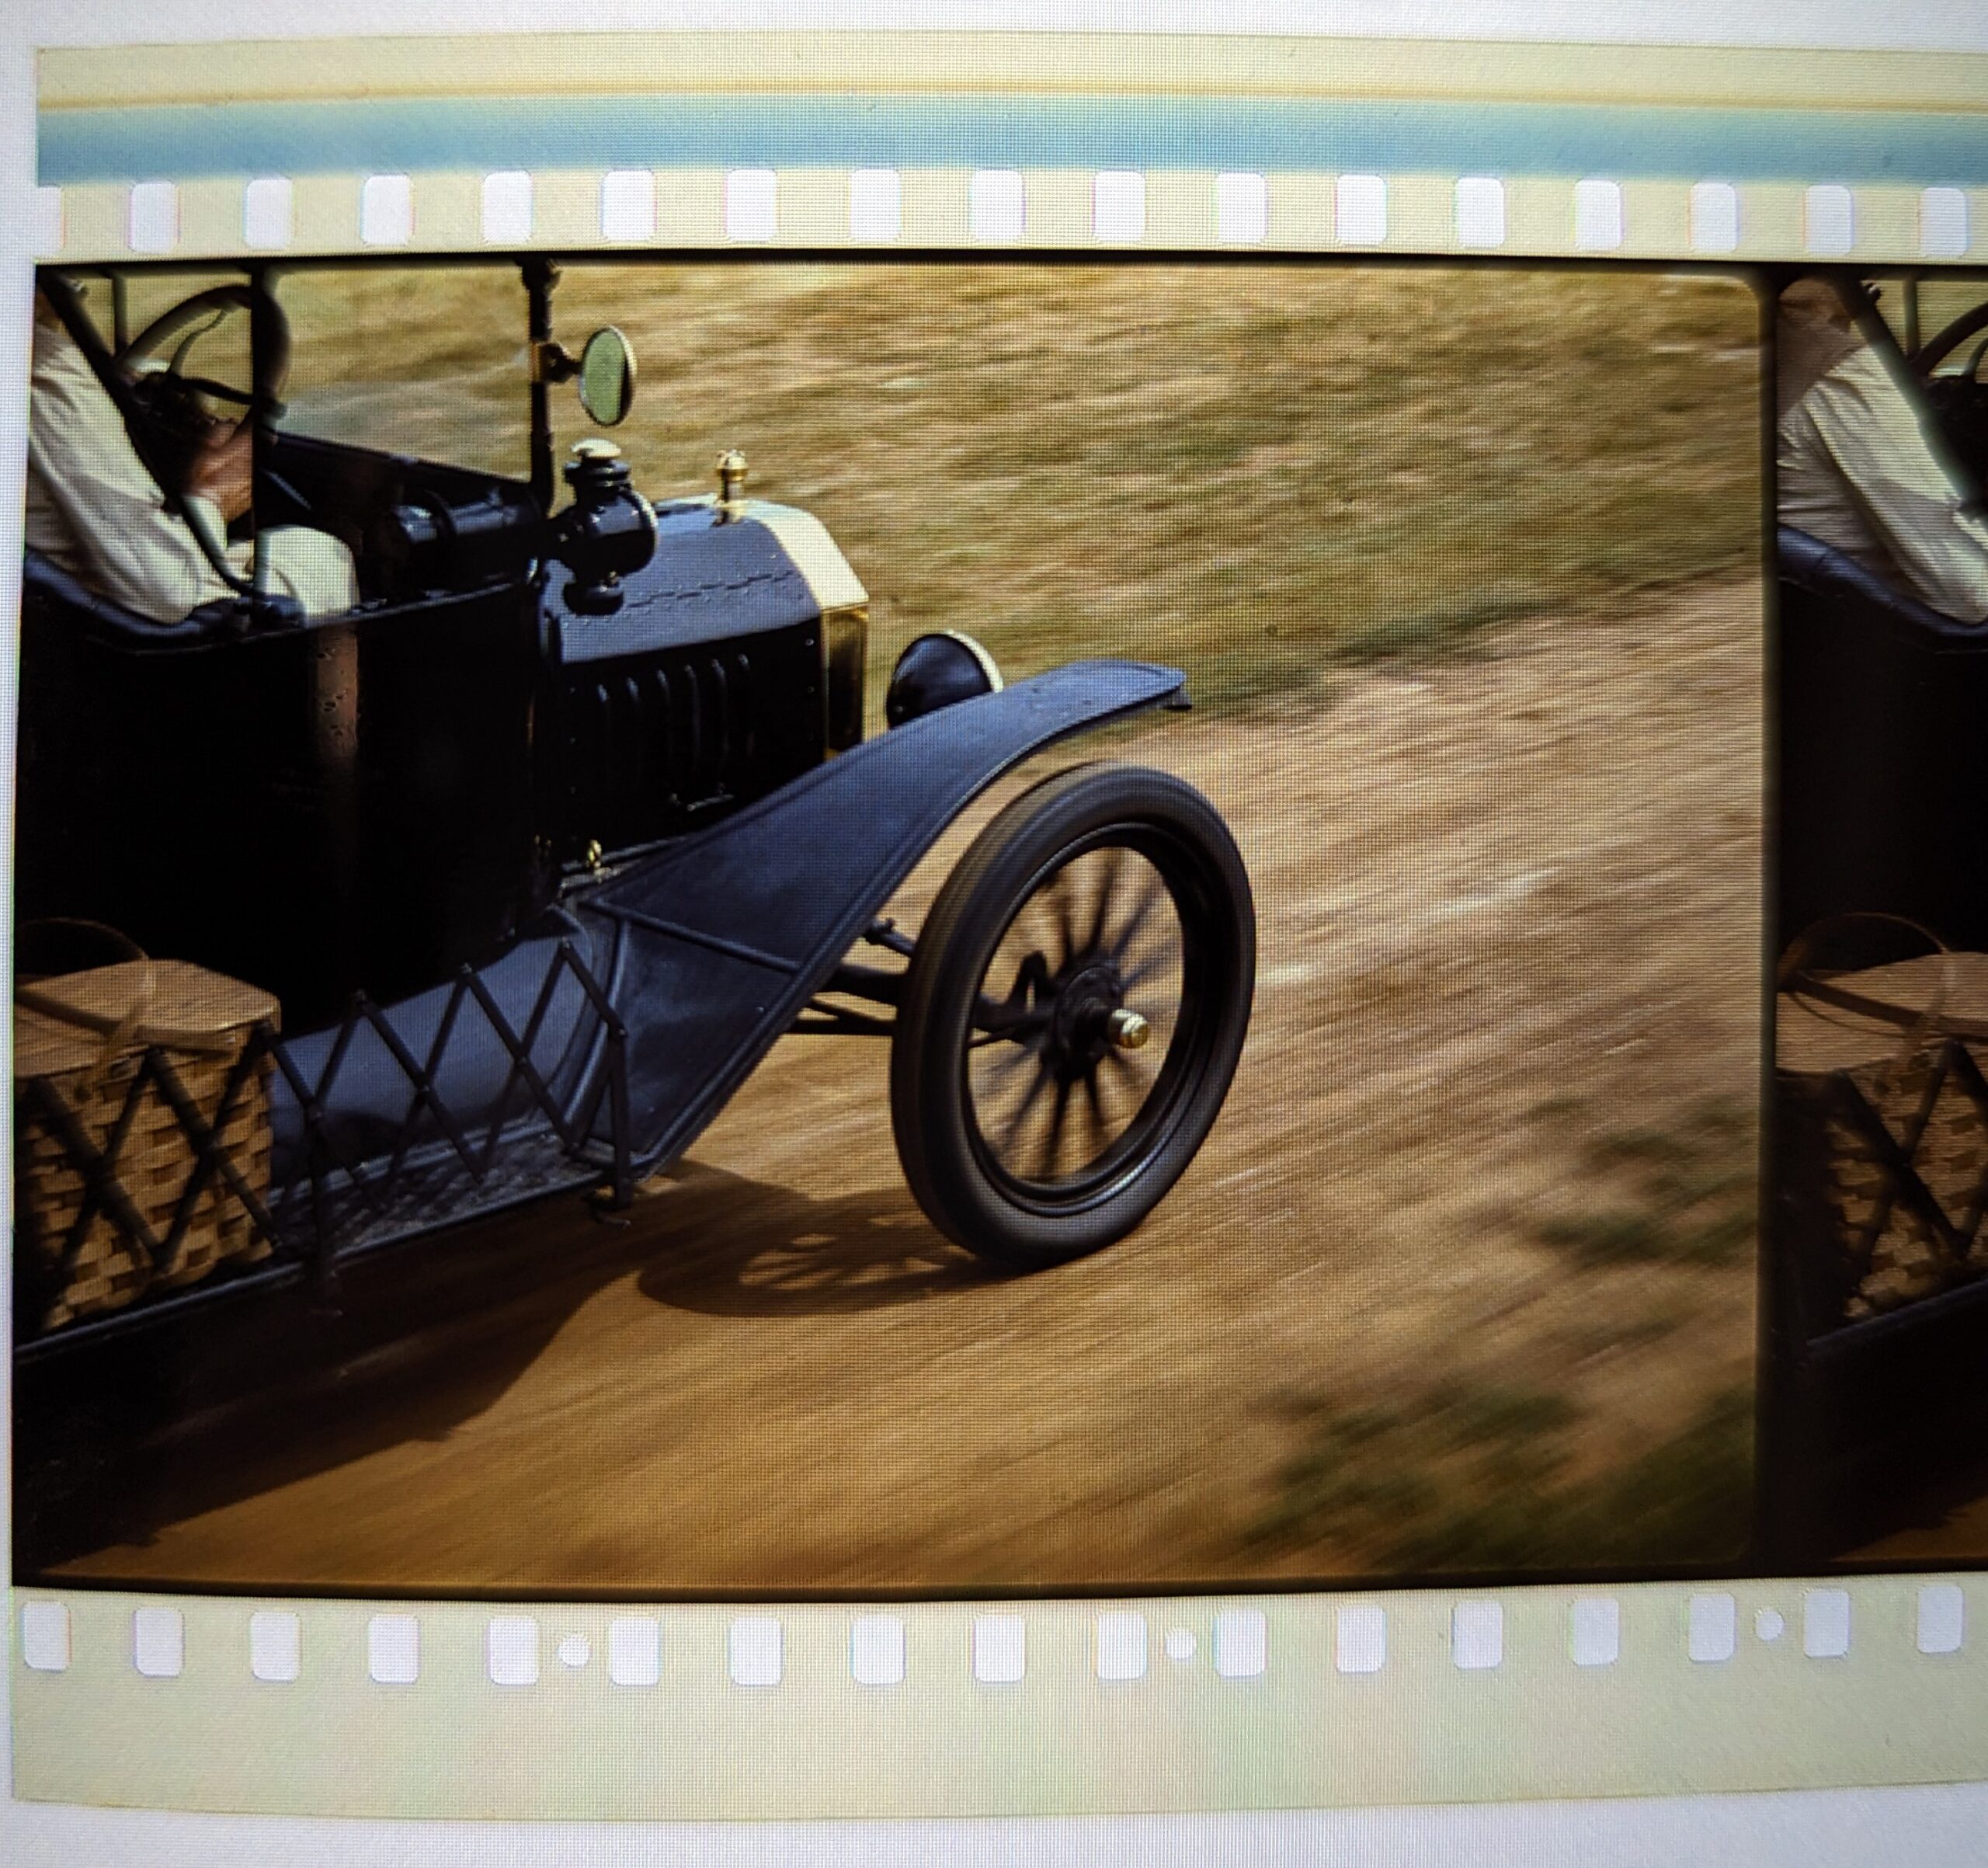 One frame of a film strip showing an early motor car